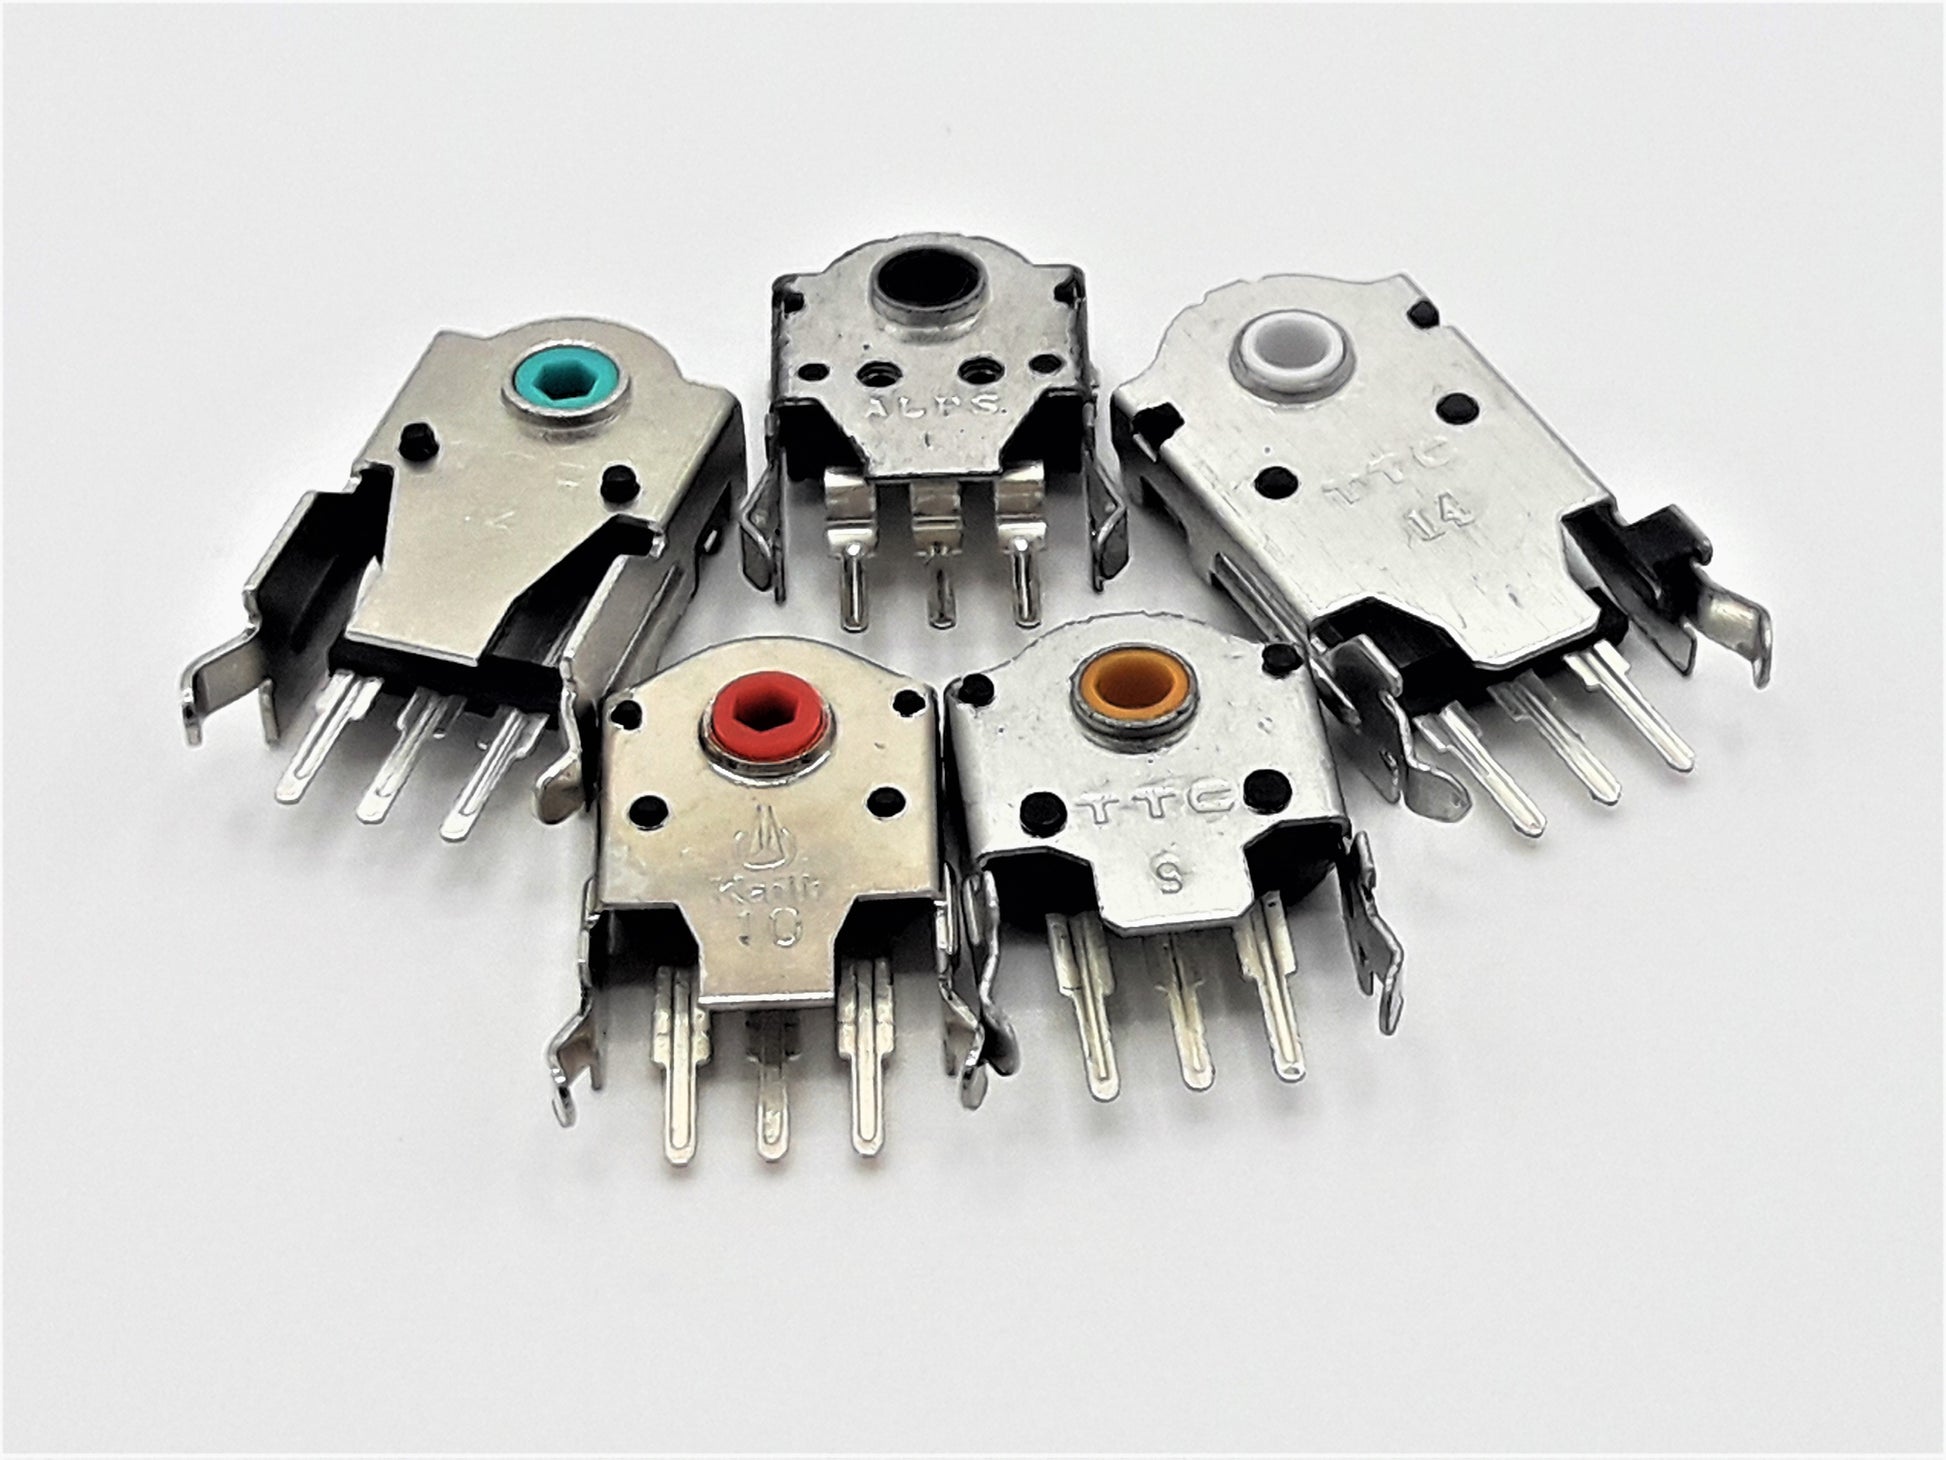 Mouse Scroll Wheel Encoders TTC Kailh Alps